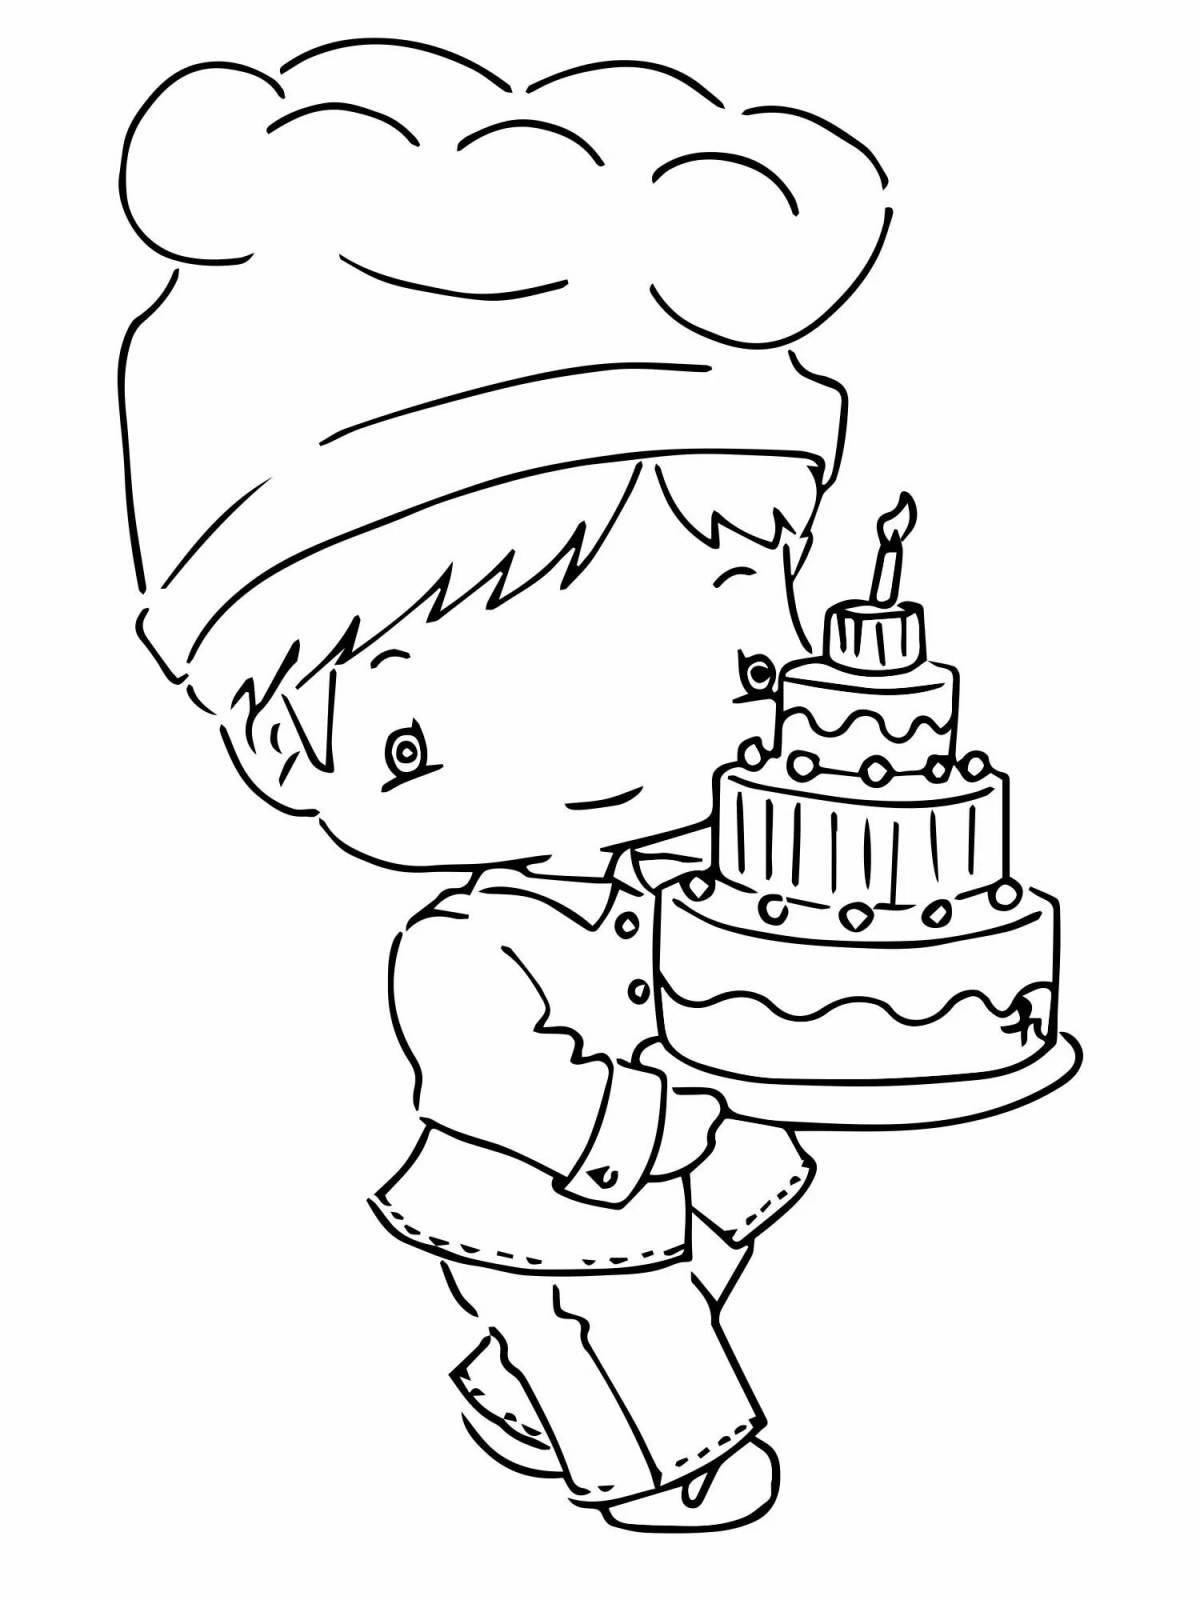 Pastry chef coloring page with splashes of color